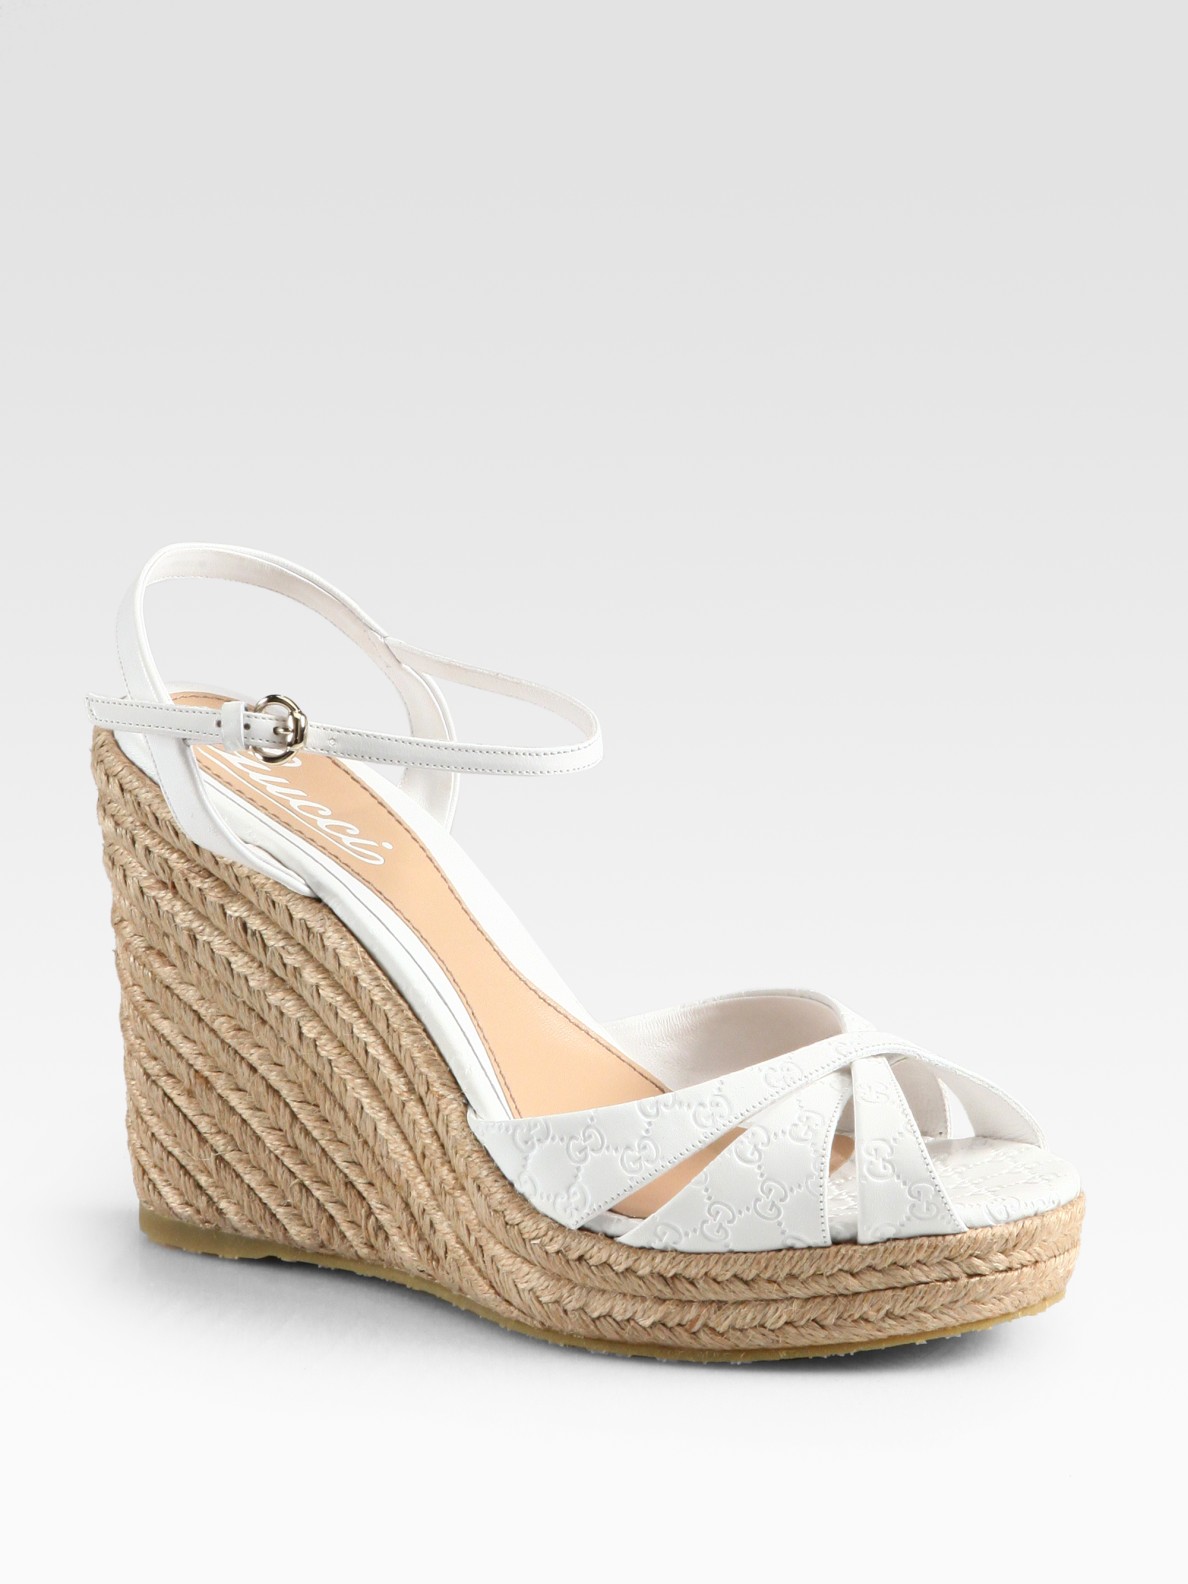 Lyst - Gucci Penelope Gg Leather Espadrille Wedges in White